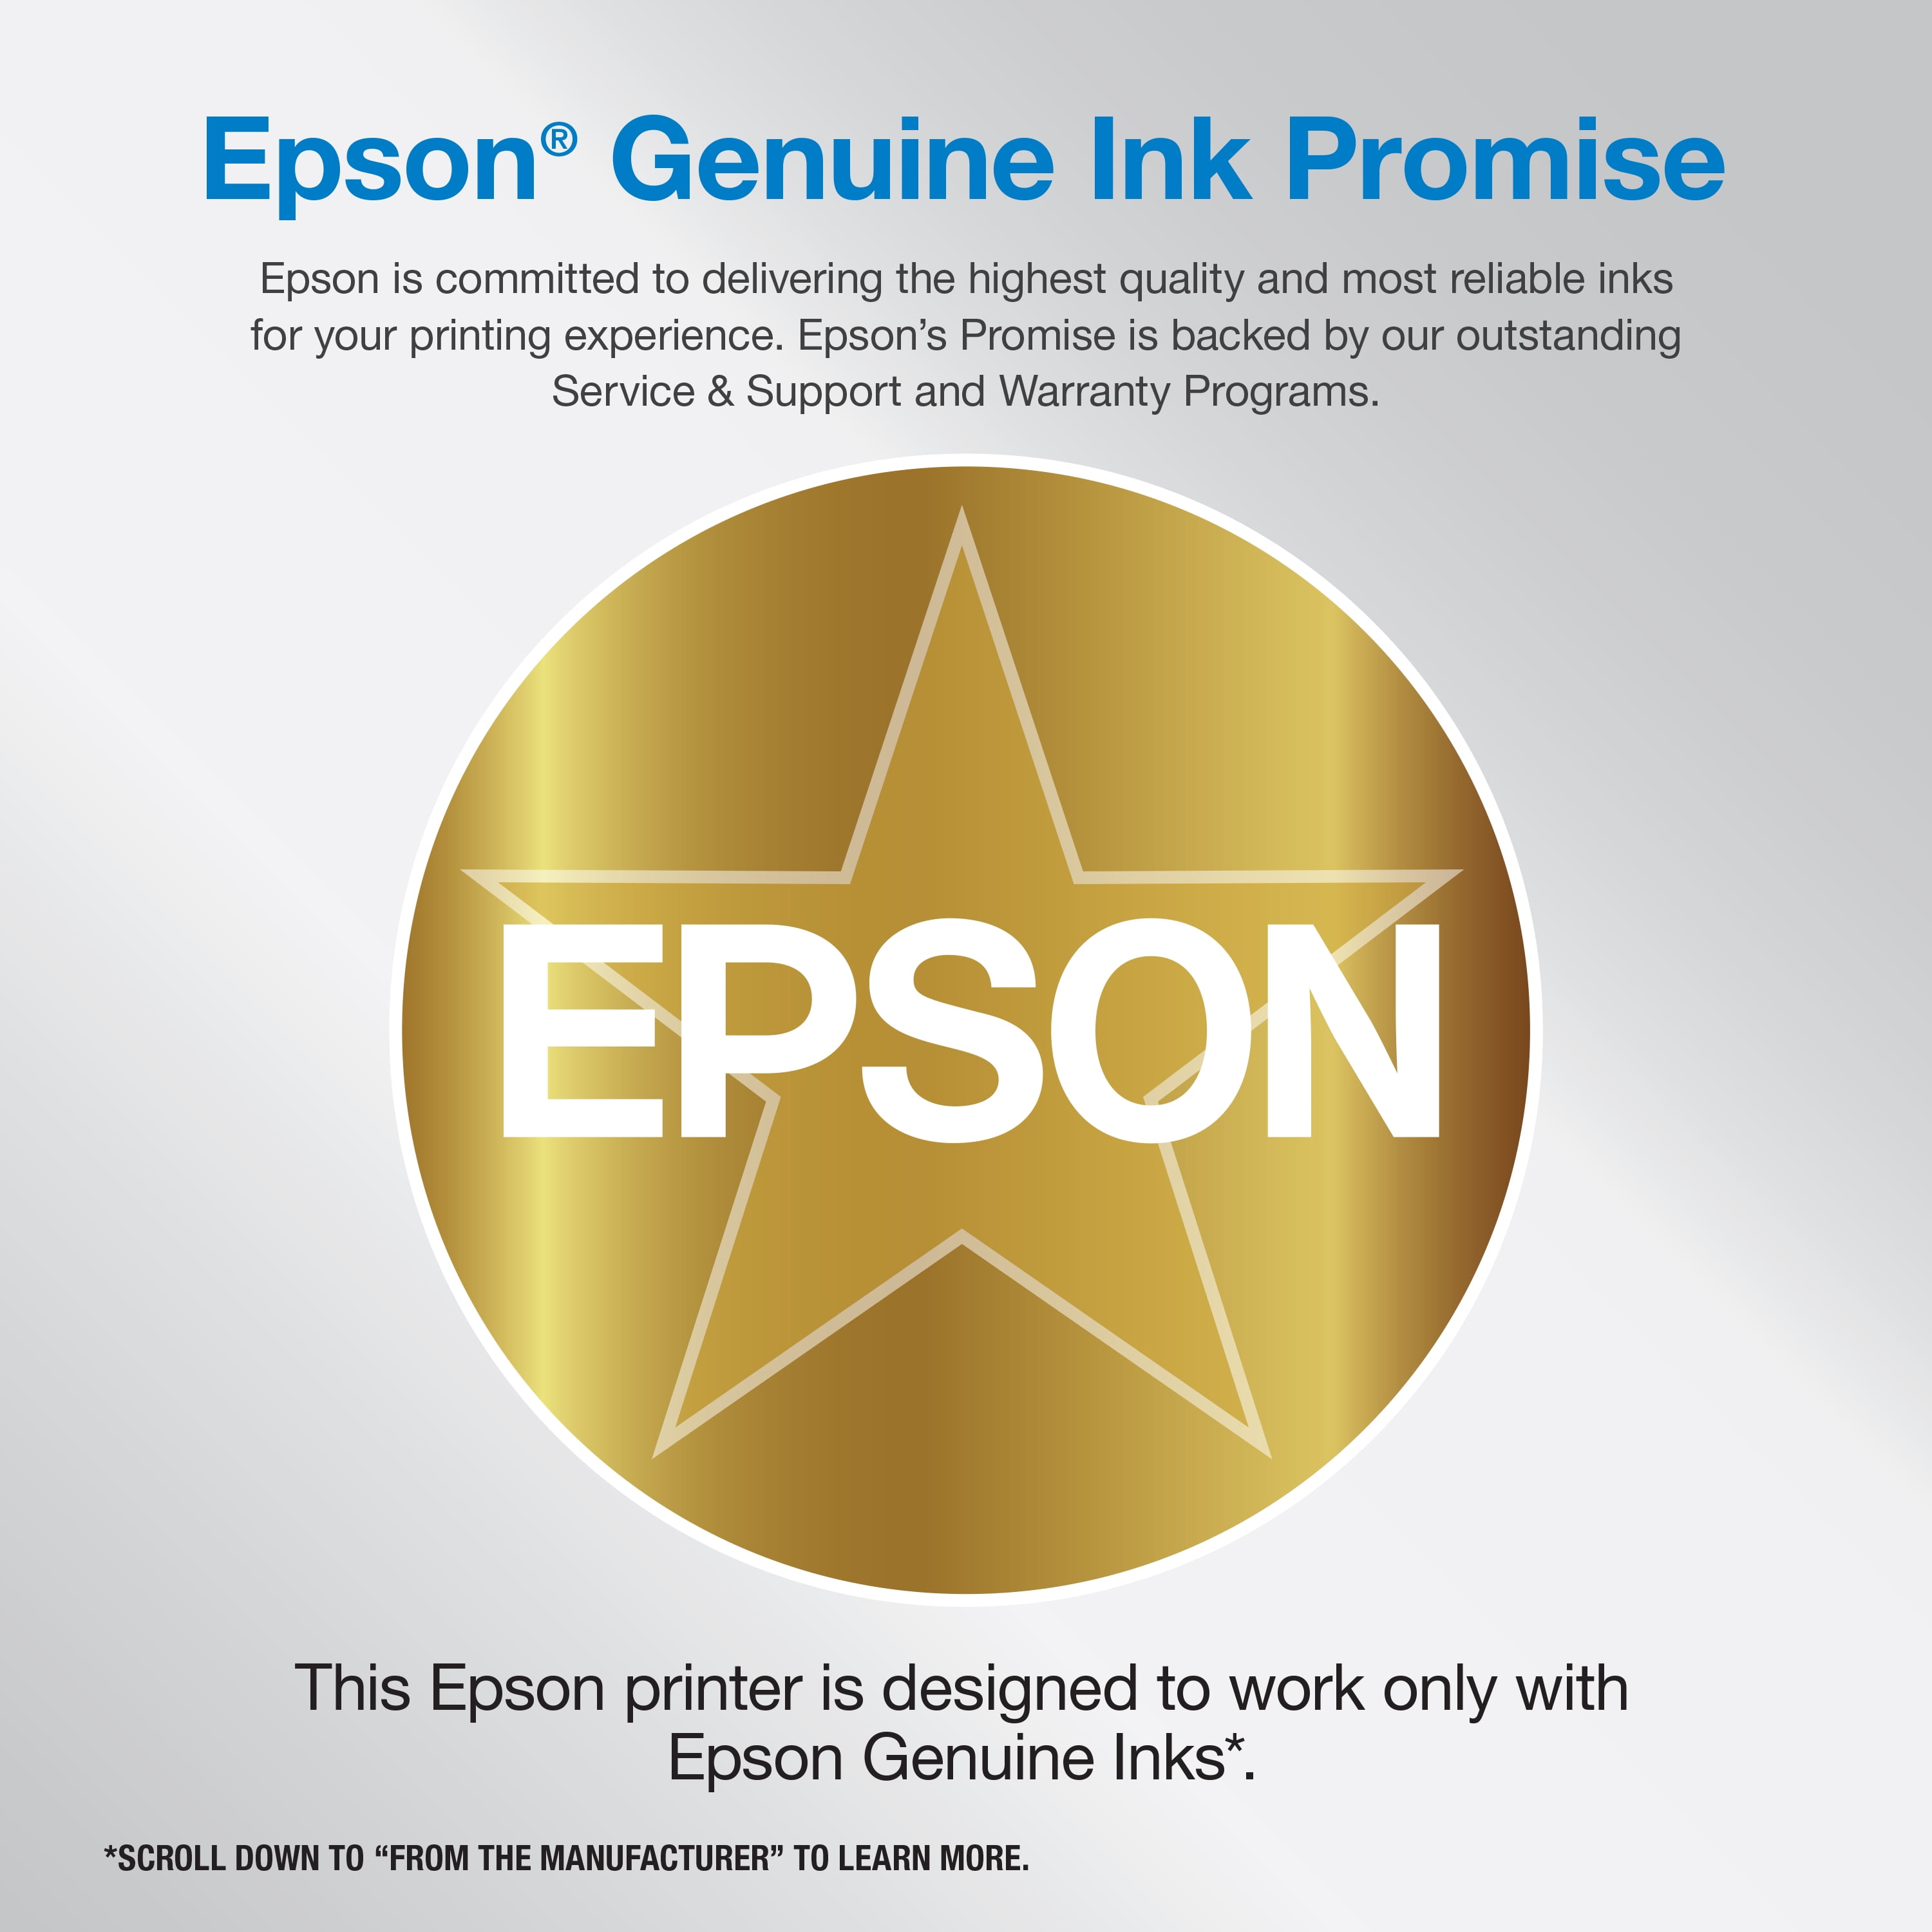 Epson Workforce Pro WF-7840 Wireless All-in-One Wide-Format Printer with  Auto 2-Sided Print up to 13\